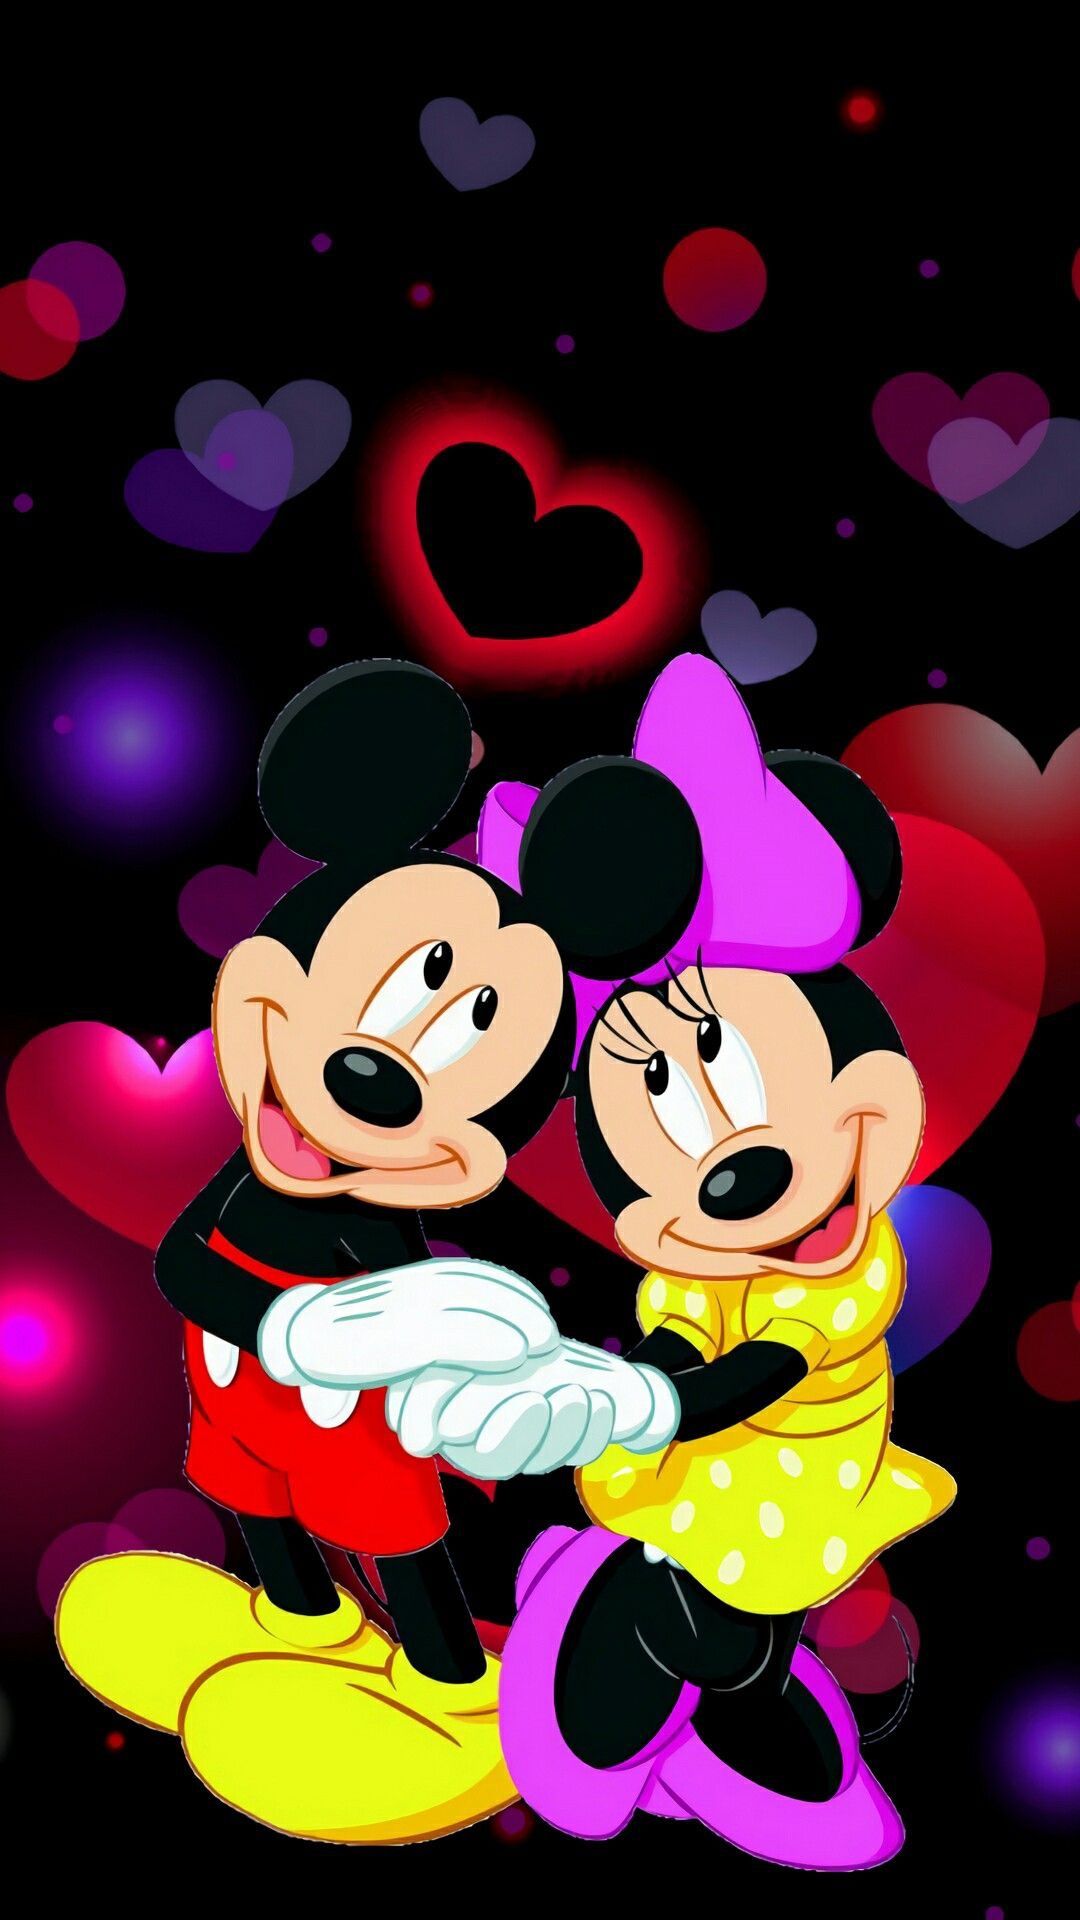 Save for later use. Minnie mouse picture, Mickey mouse wallpaper, Mickey mouse picture